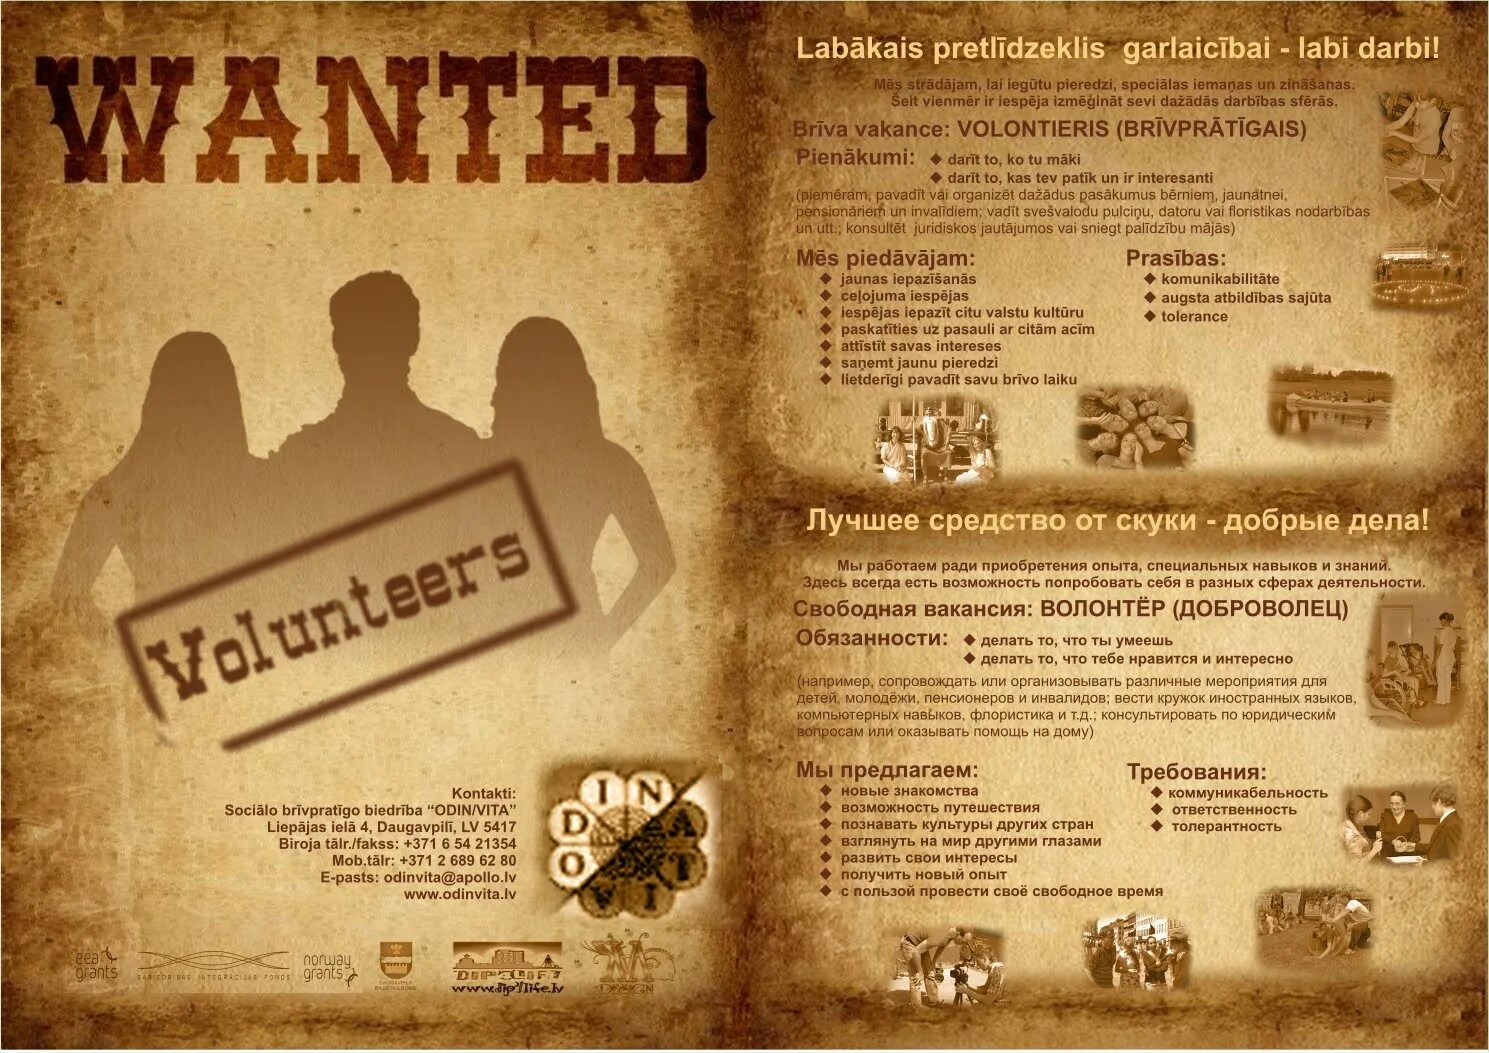 Writer wanted. Wanted объявление. Wanted картинка. Афиша wanted. Рамка wanted.